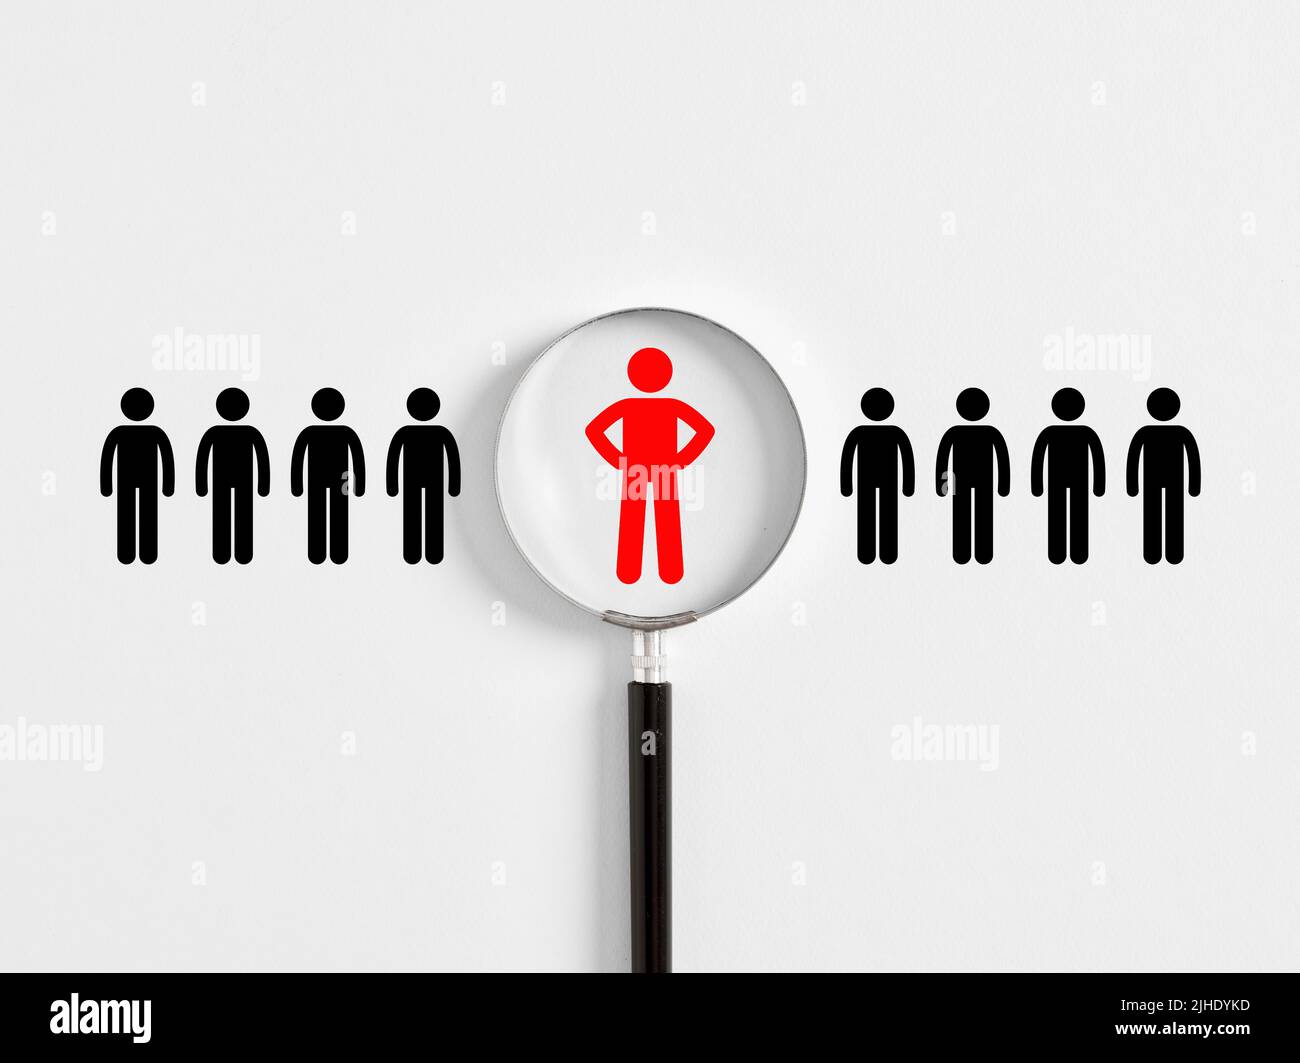 Human resources management, job recruitment or employee search concept. Magnifying glass with employee icons on white background. Stock Photo